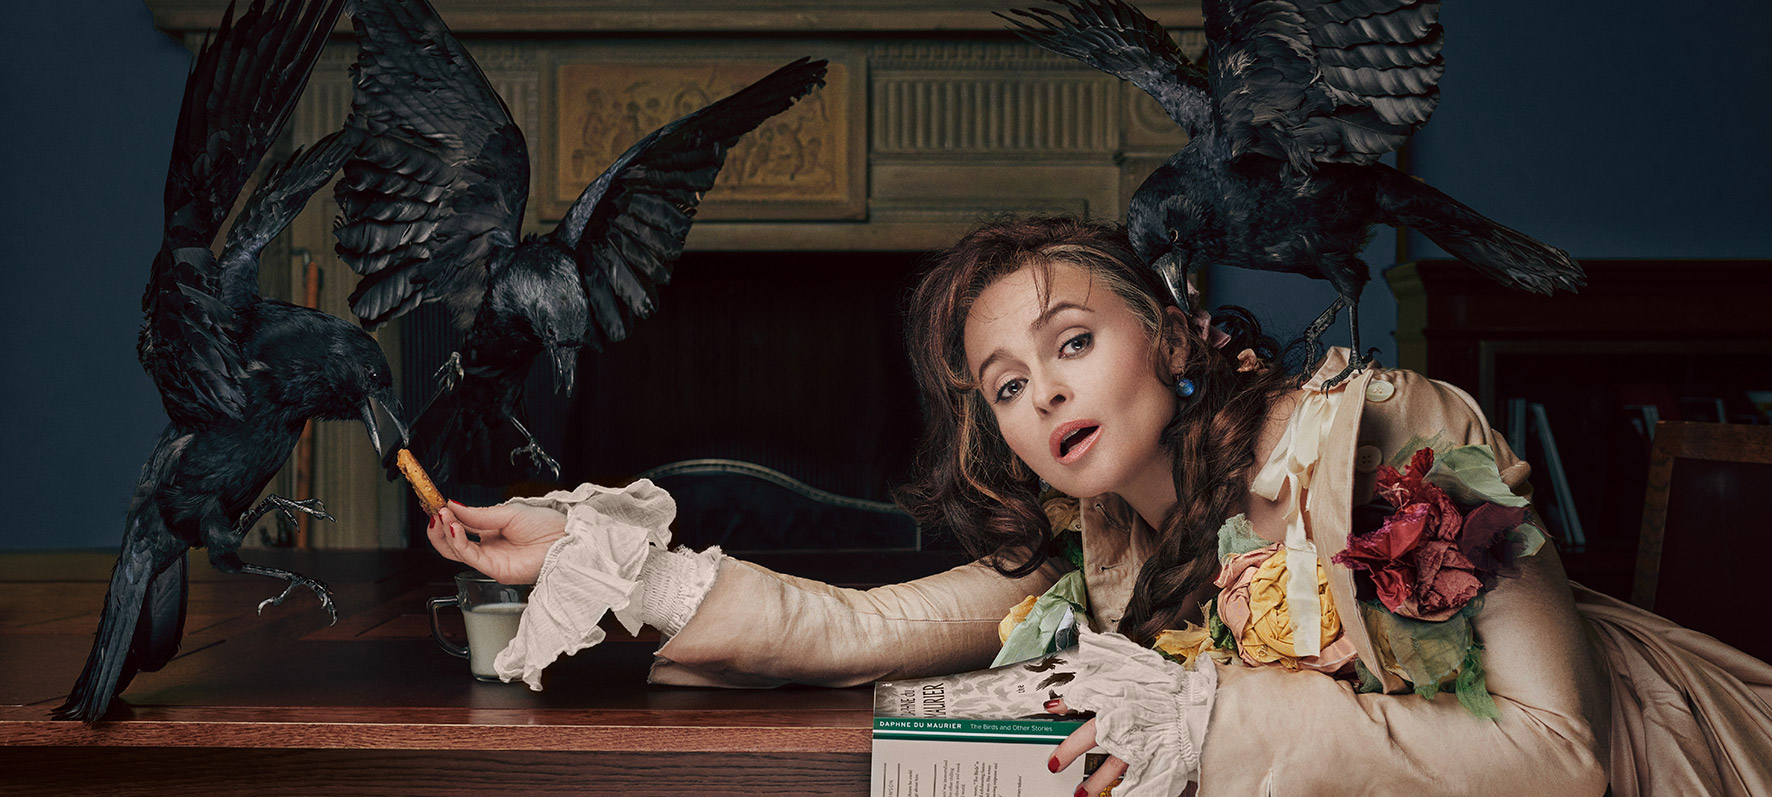 Helena-Bonham-Carter-double-page-II-for-The-Sunday-Times-by-Sane-Seve_v2